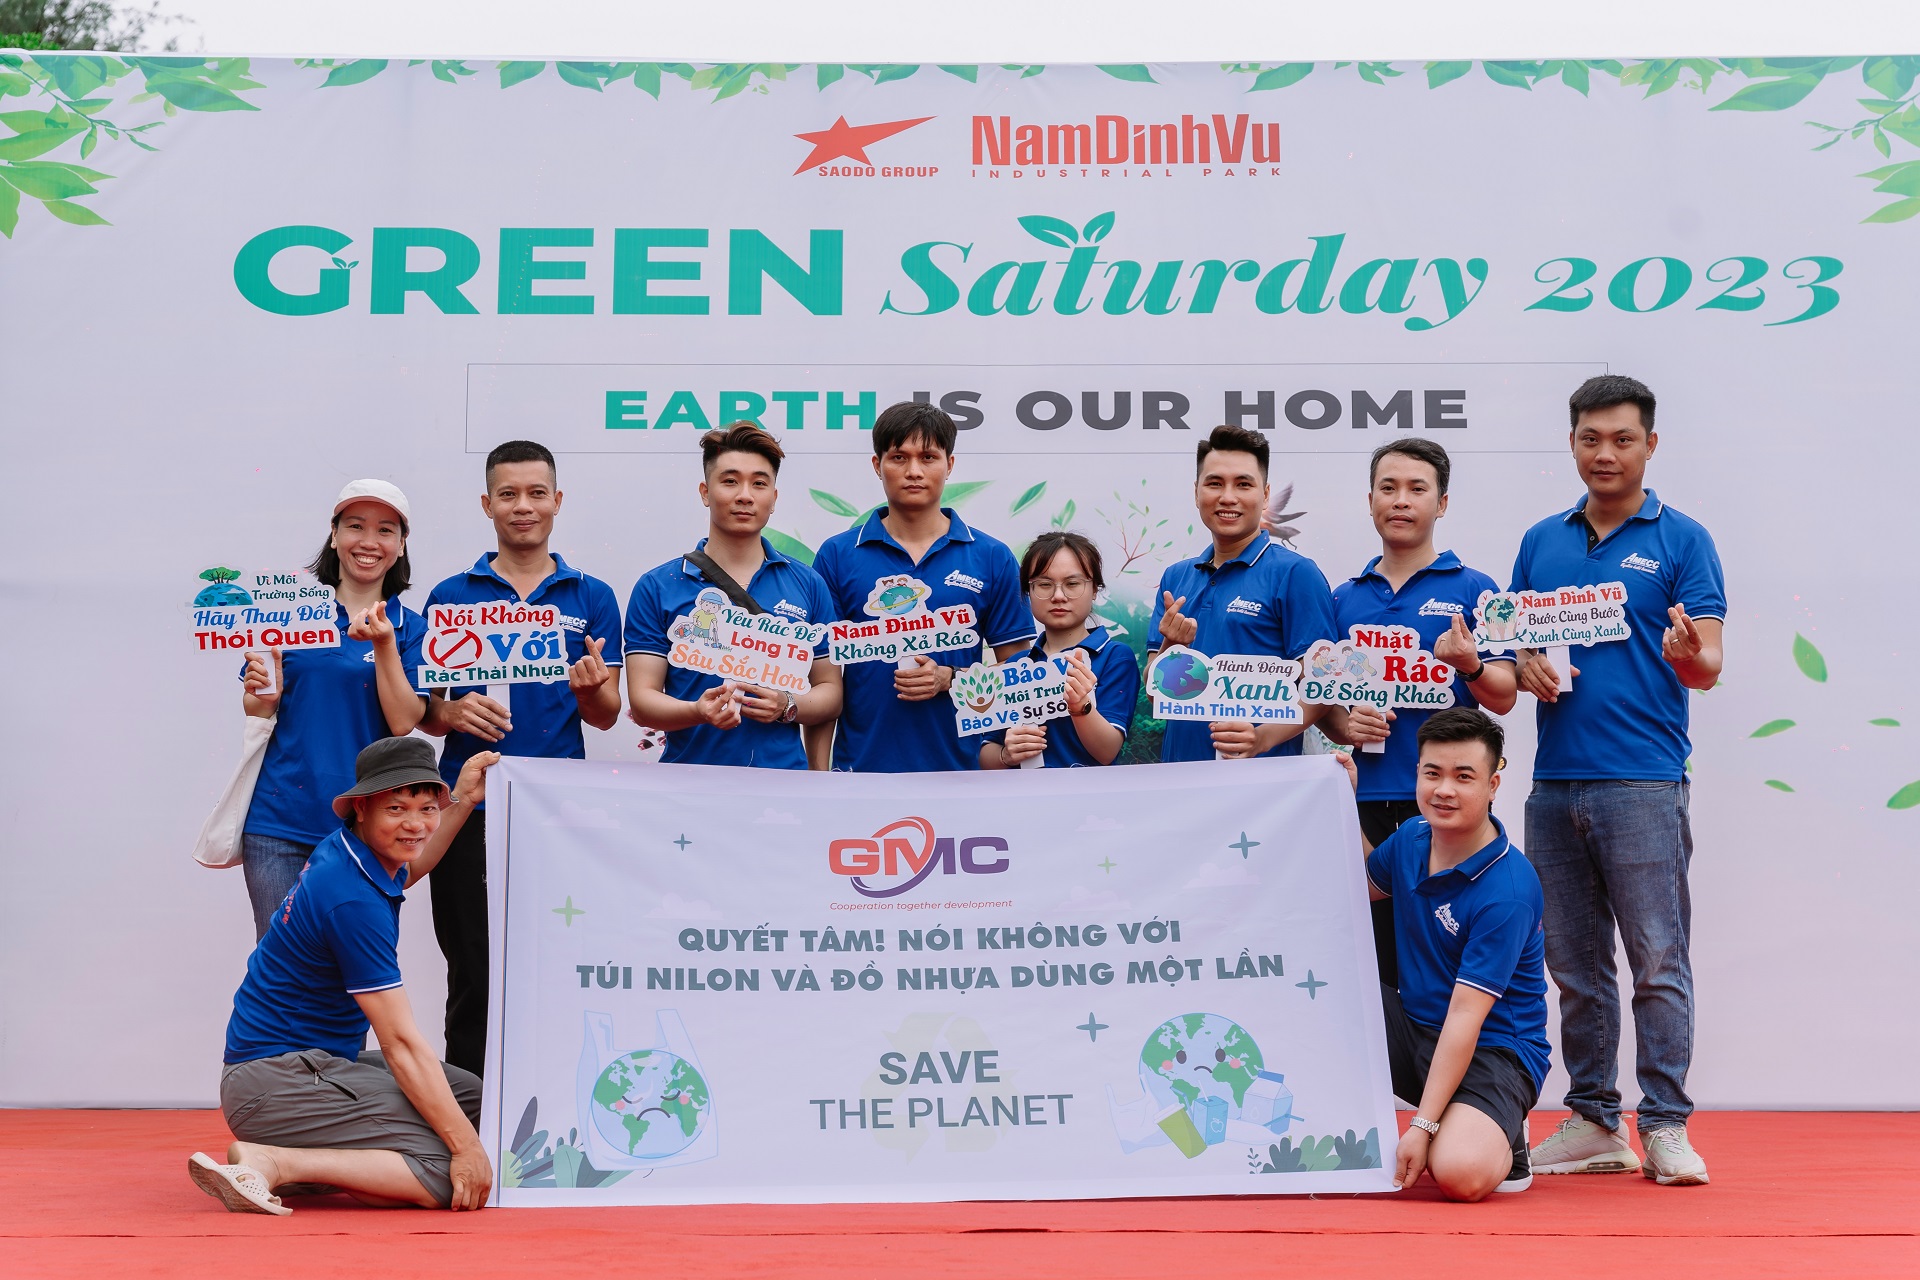 The Amecc Company participated in the event "Green Saturday" at Nam Dinh Vu Industrial Park.